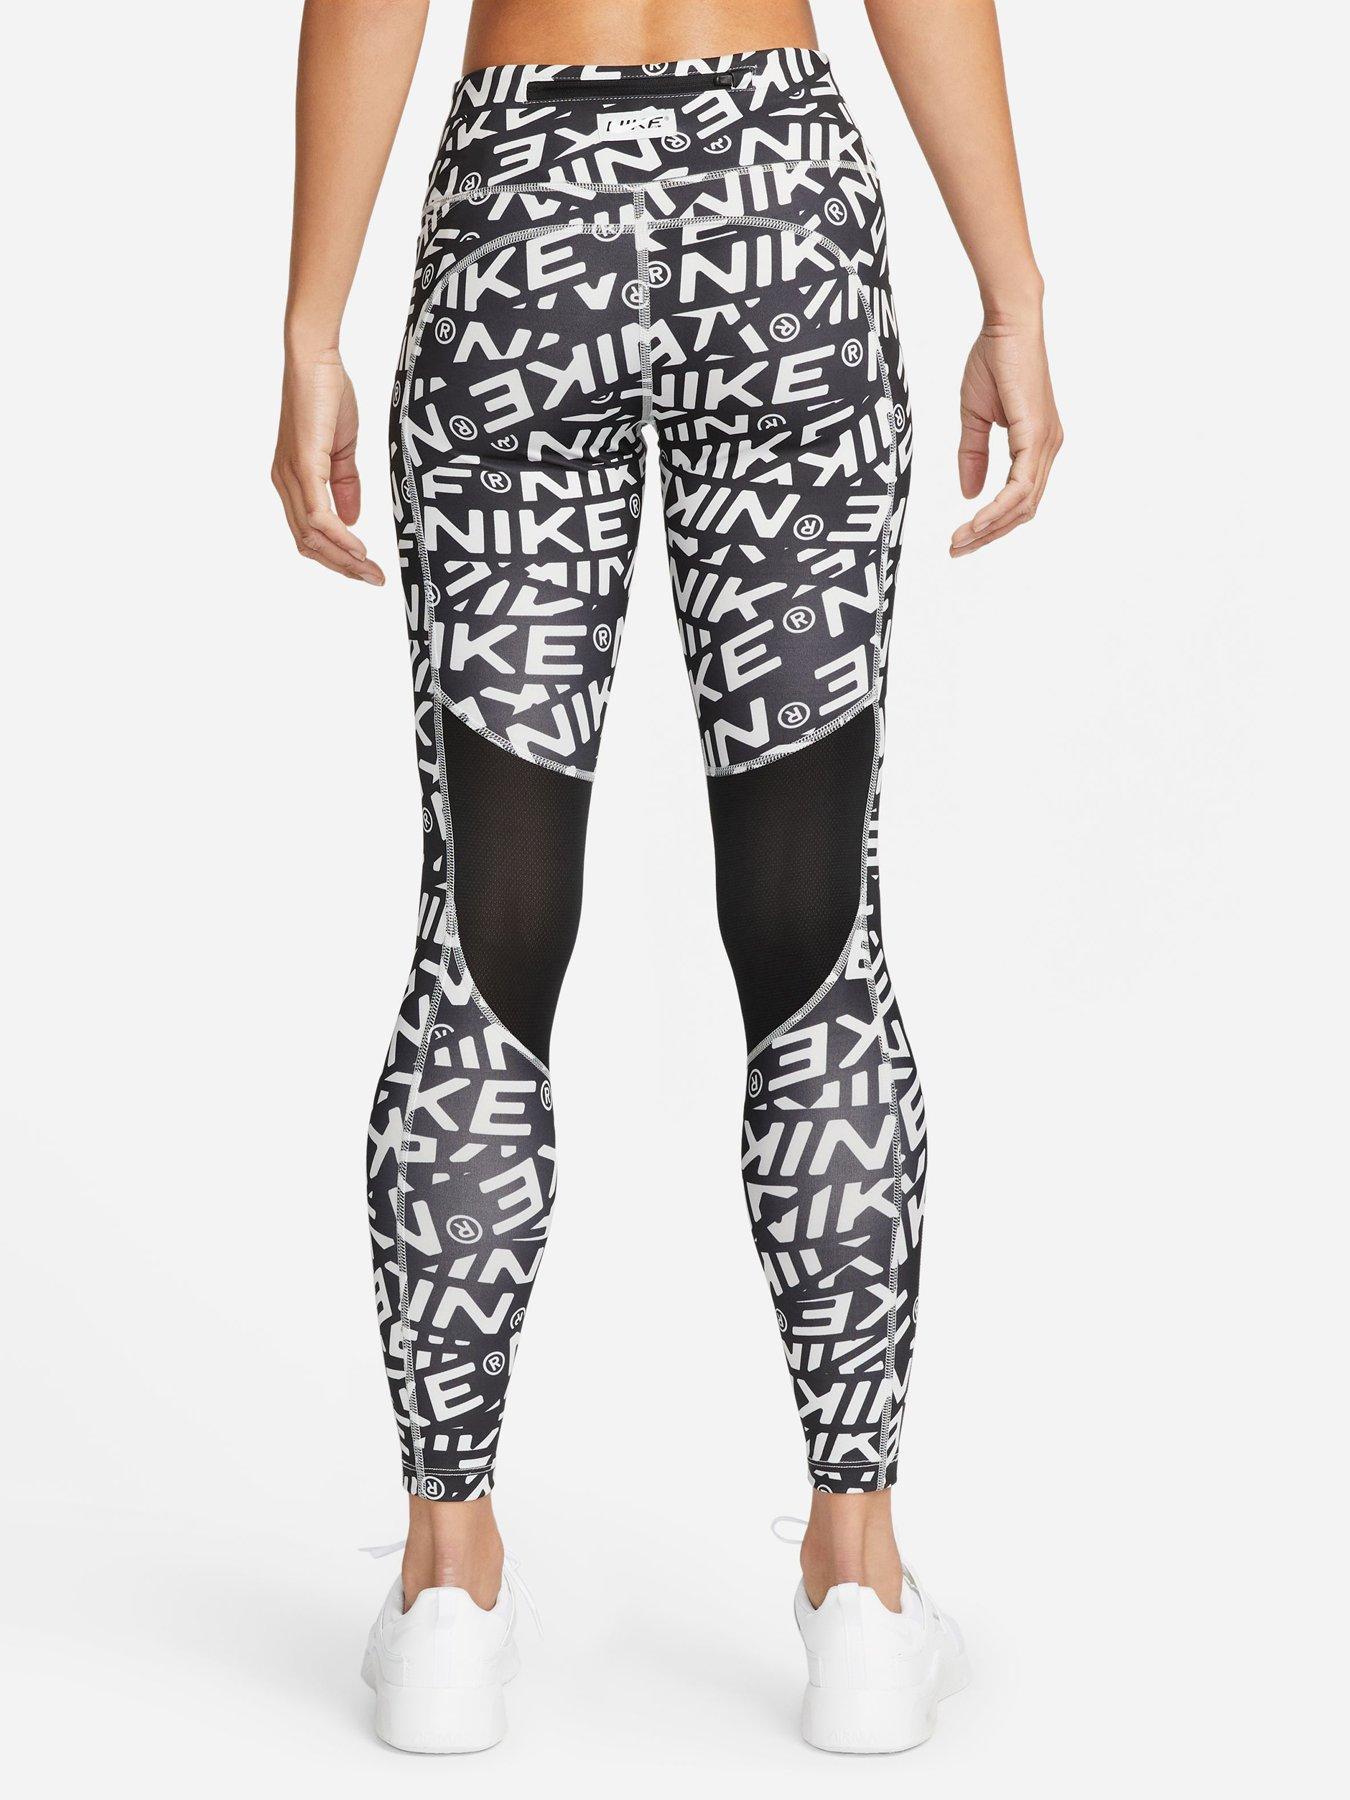 Nike Fast Women's Mid-Rise 7/8 Printed Leggings with Pockets. UK